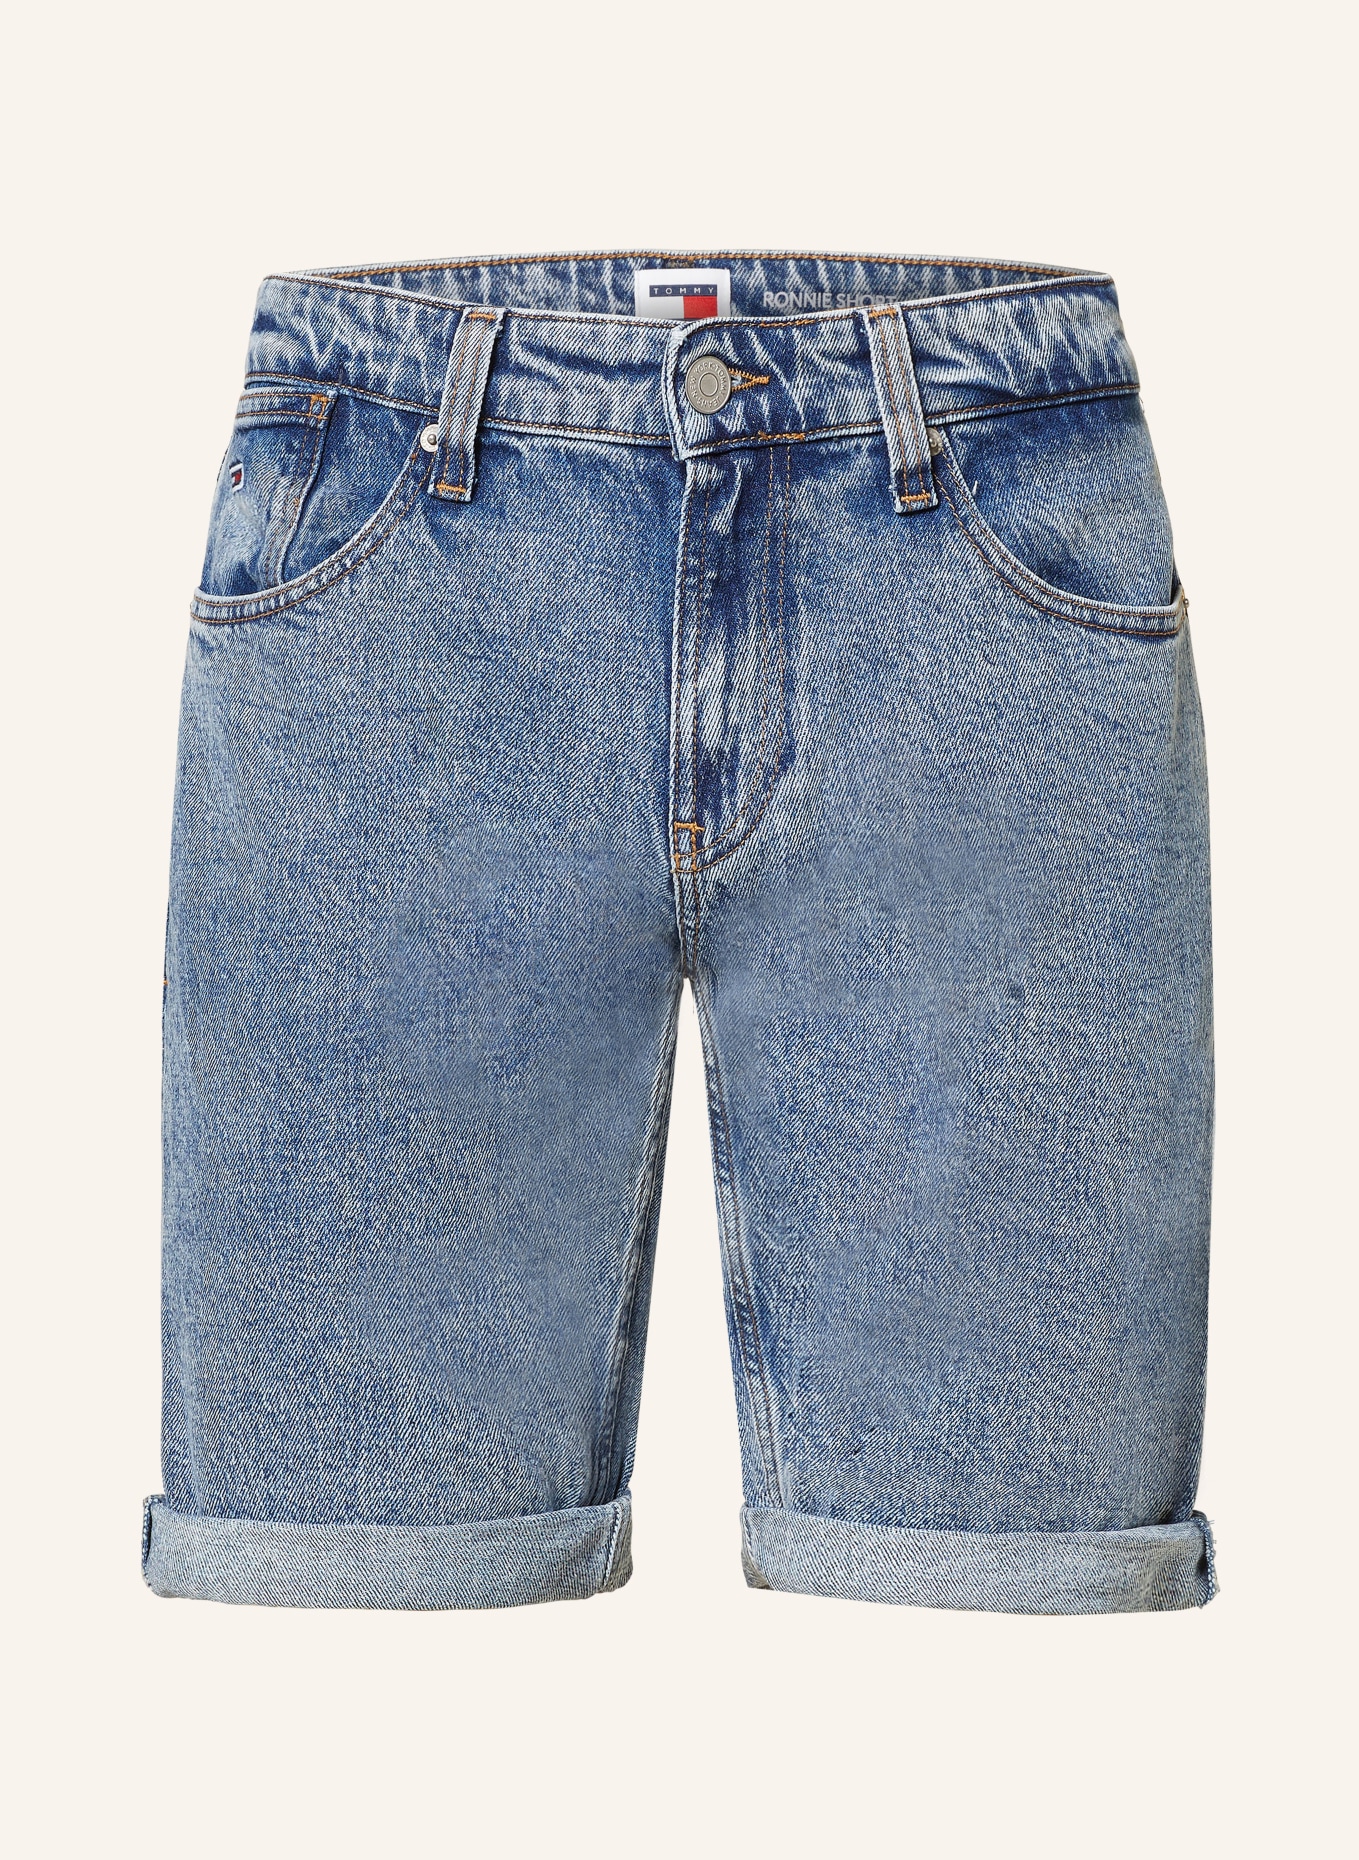 TOMMY JEANS Jeansshorts RONNIE Relaxed Fit, Farbe: 1A4 DENIM MEDIUM (Bild 1)